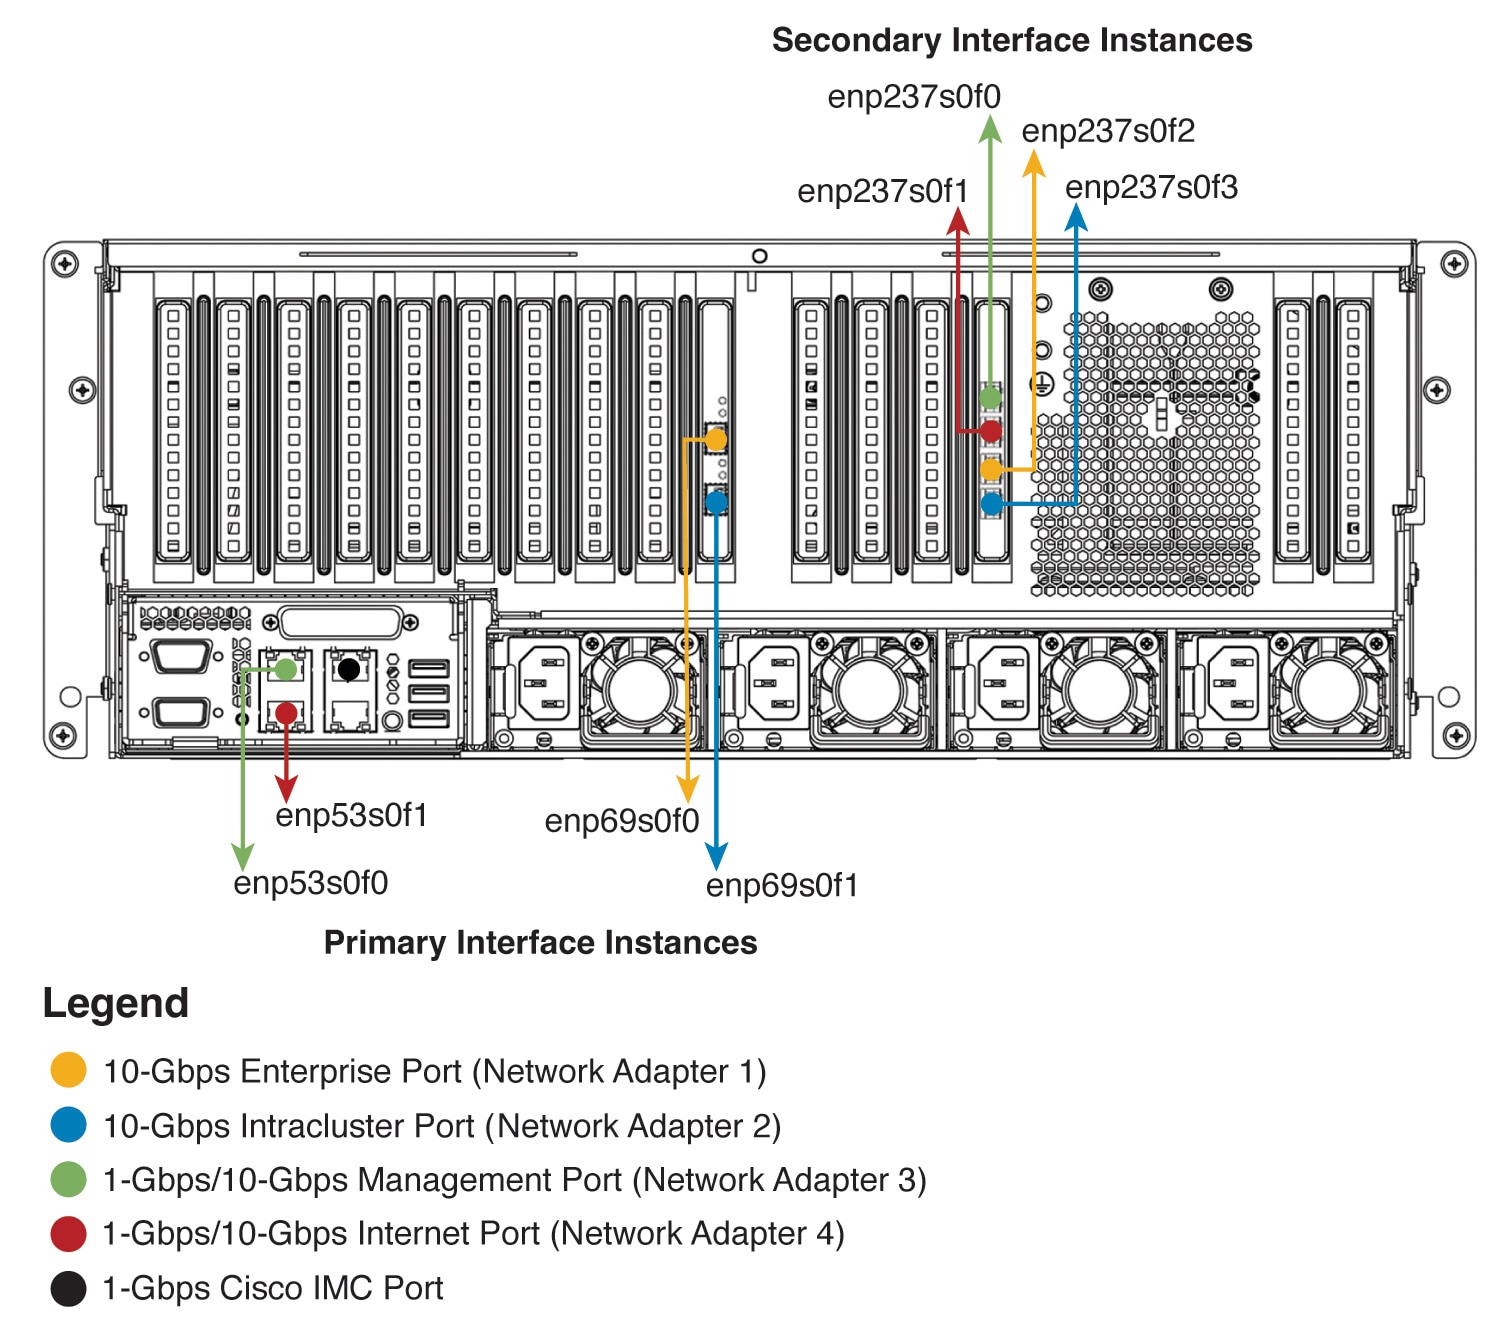 112-core appliance face plate labeled with recommended cabling per interface